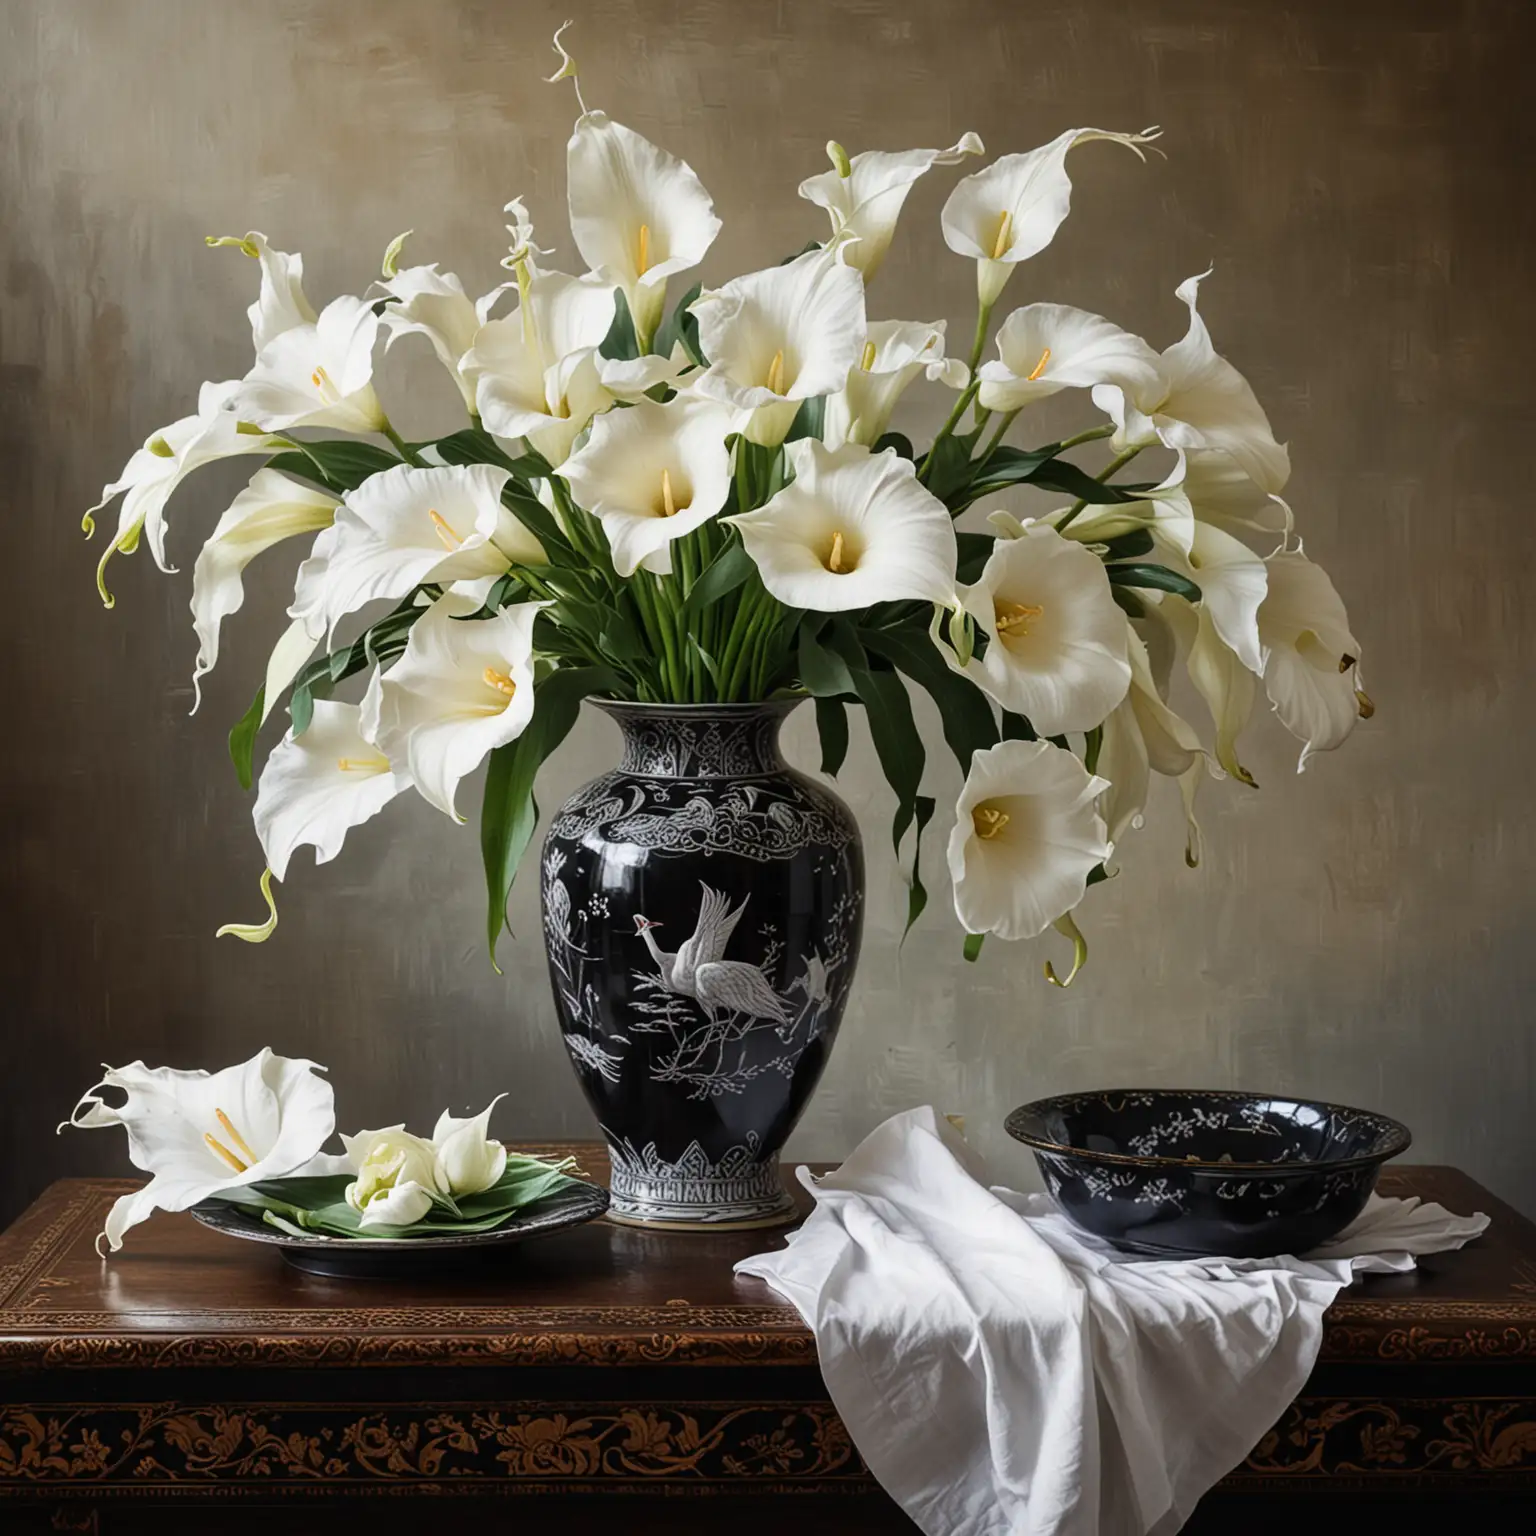 Elegant Oriental Vase with White Crane Birds and Calla Lilies Still Life Painting